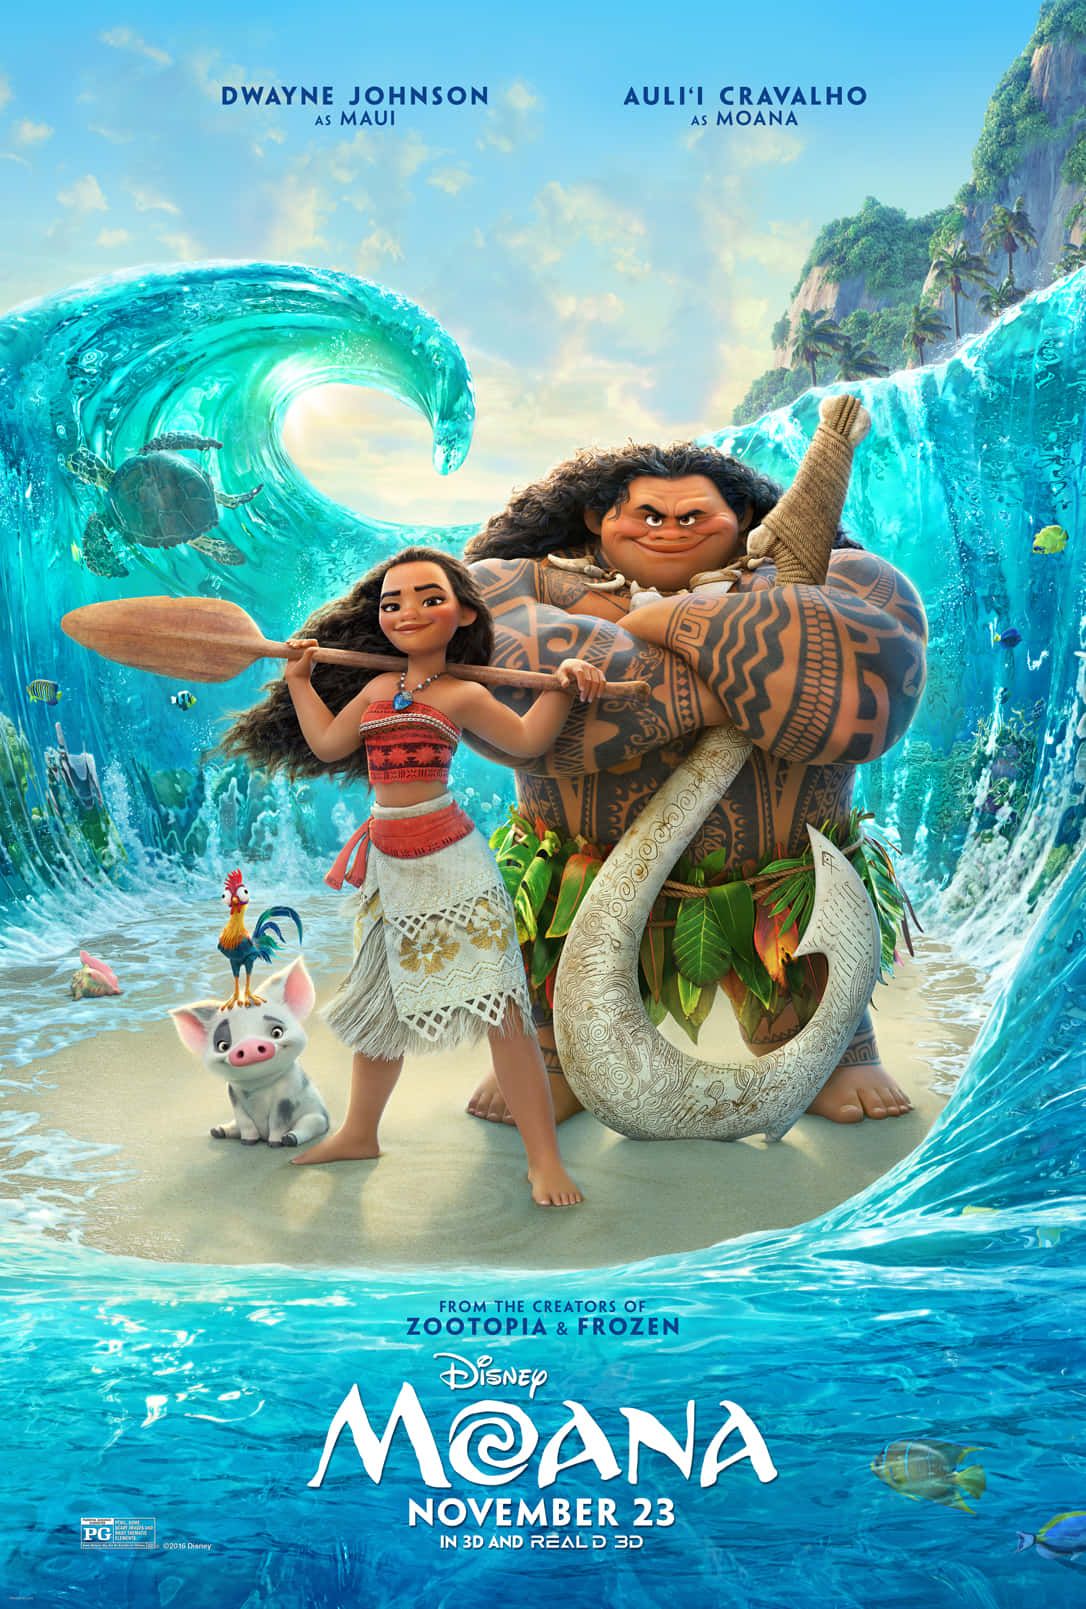 Join Moana on a Journey of Self-Discovery